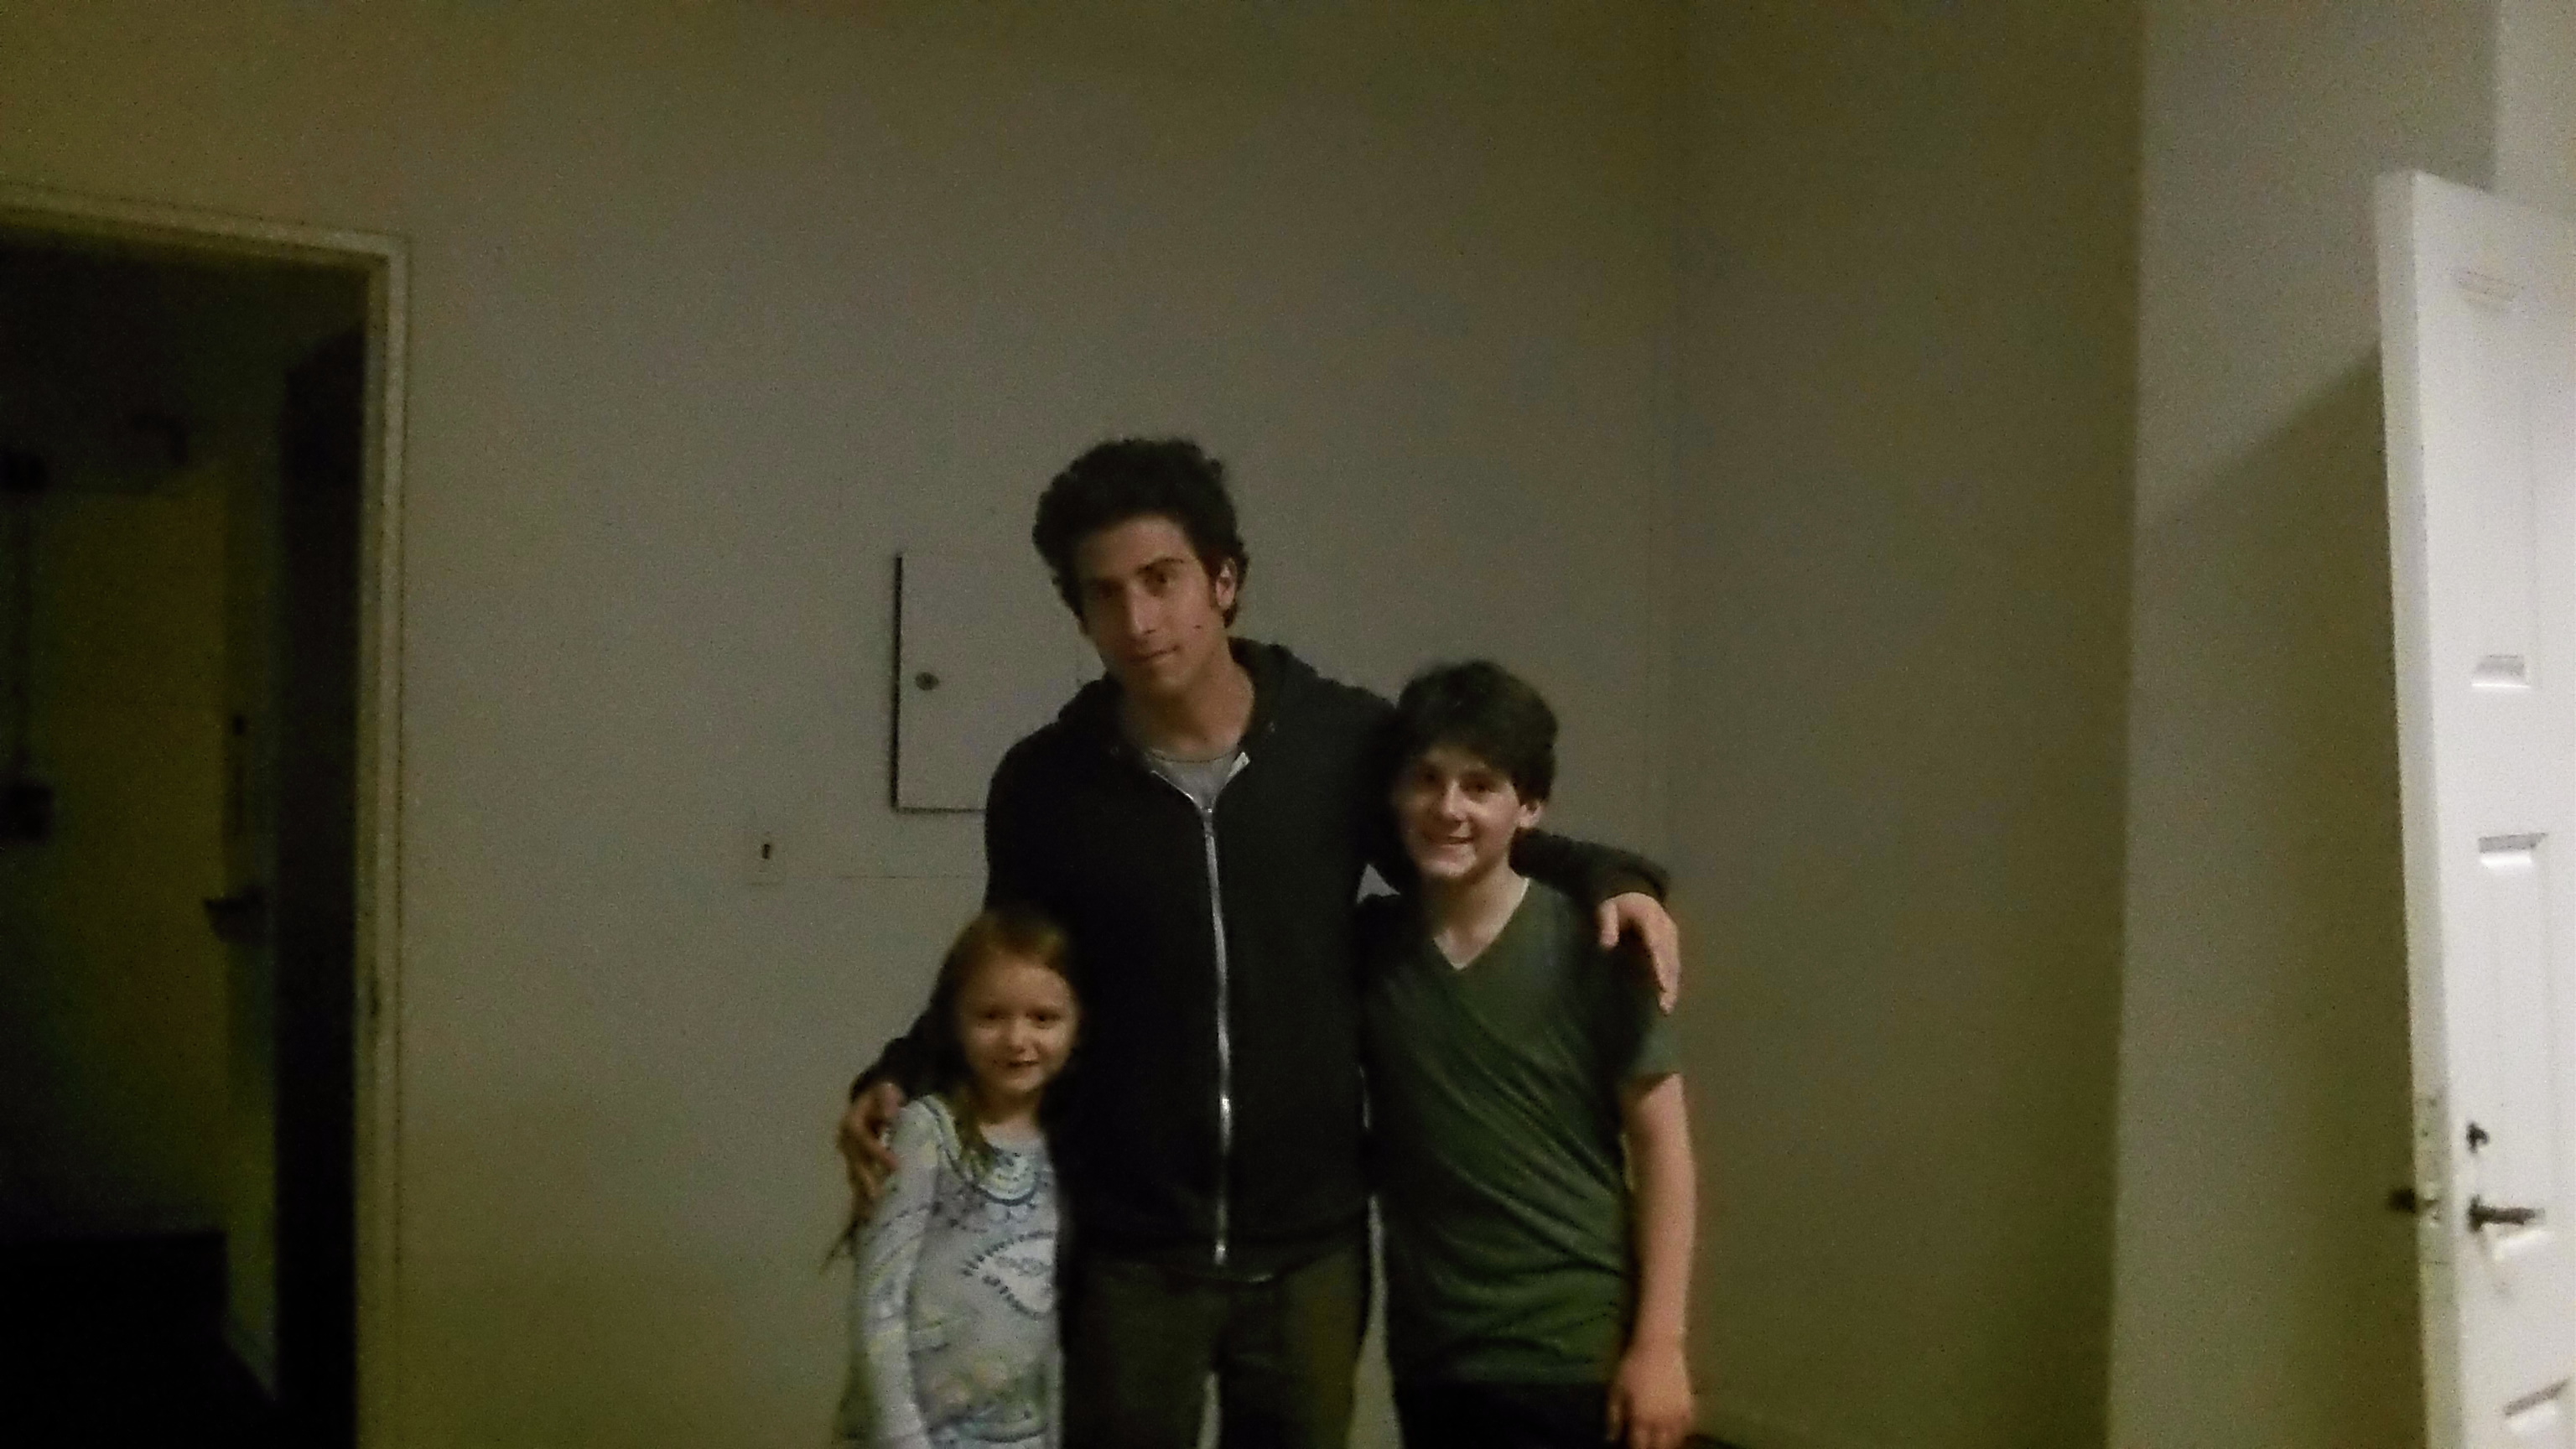 William Leon with Jake Hoffman and Jessica Tyler Brown on set of SNAP